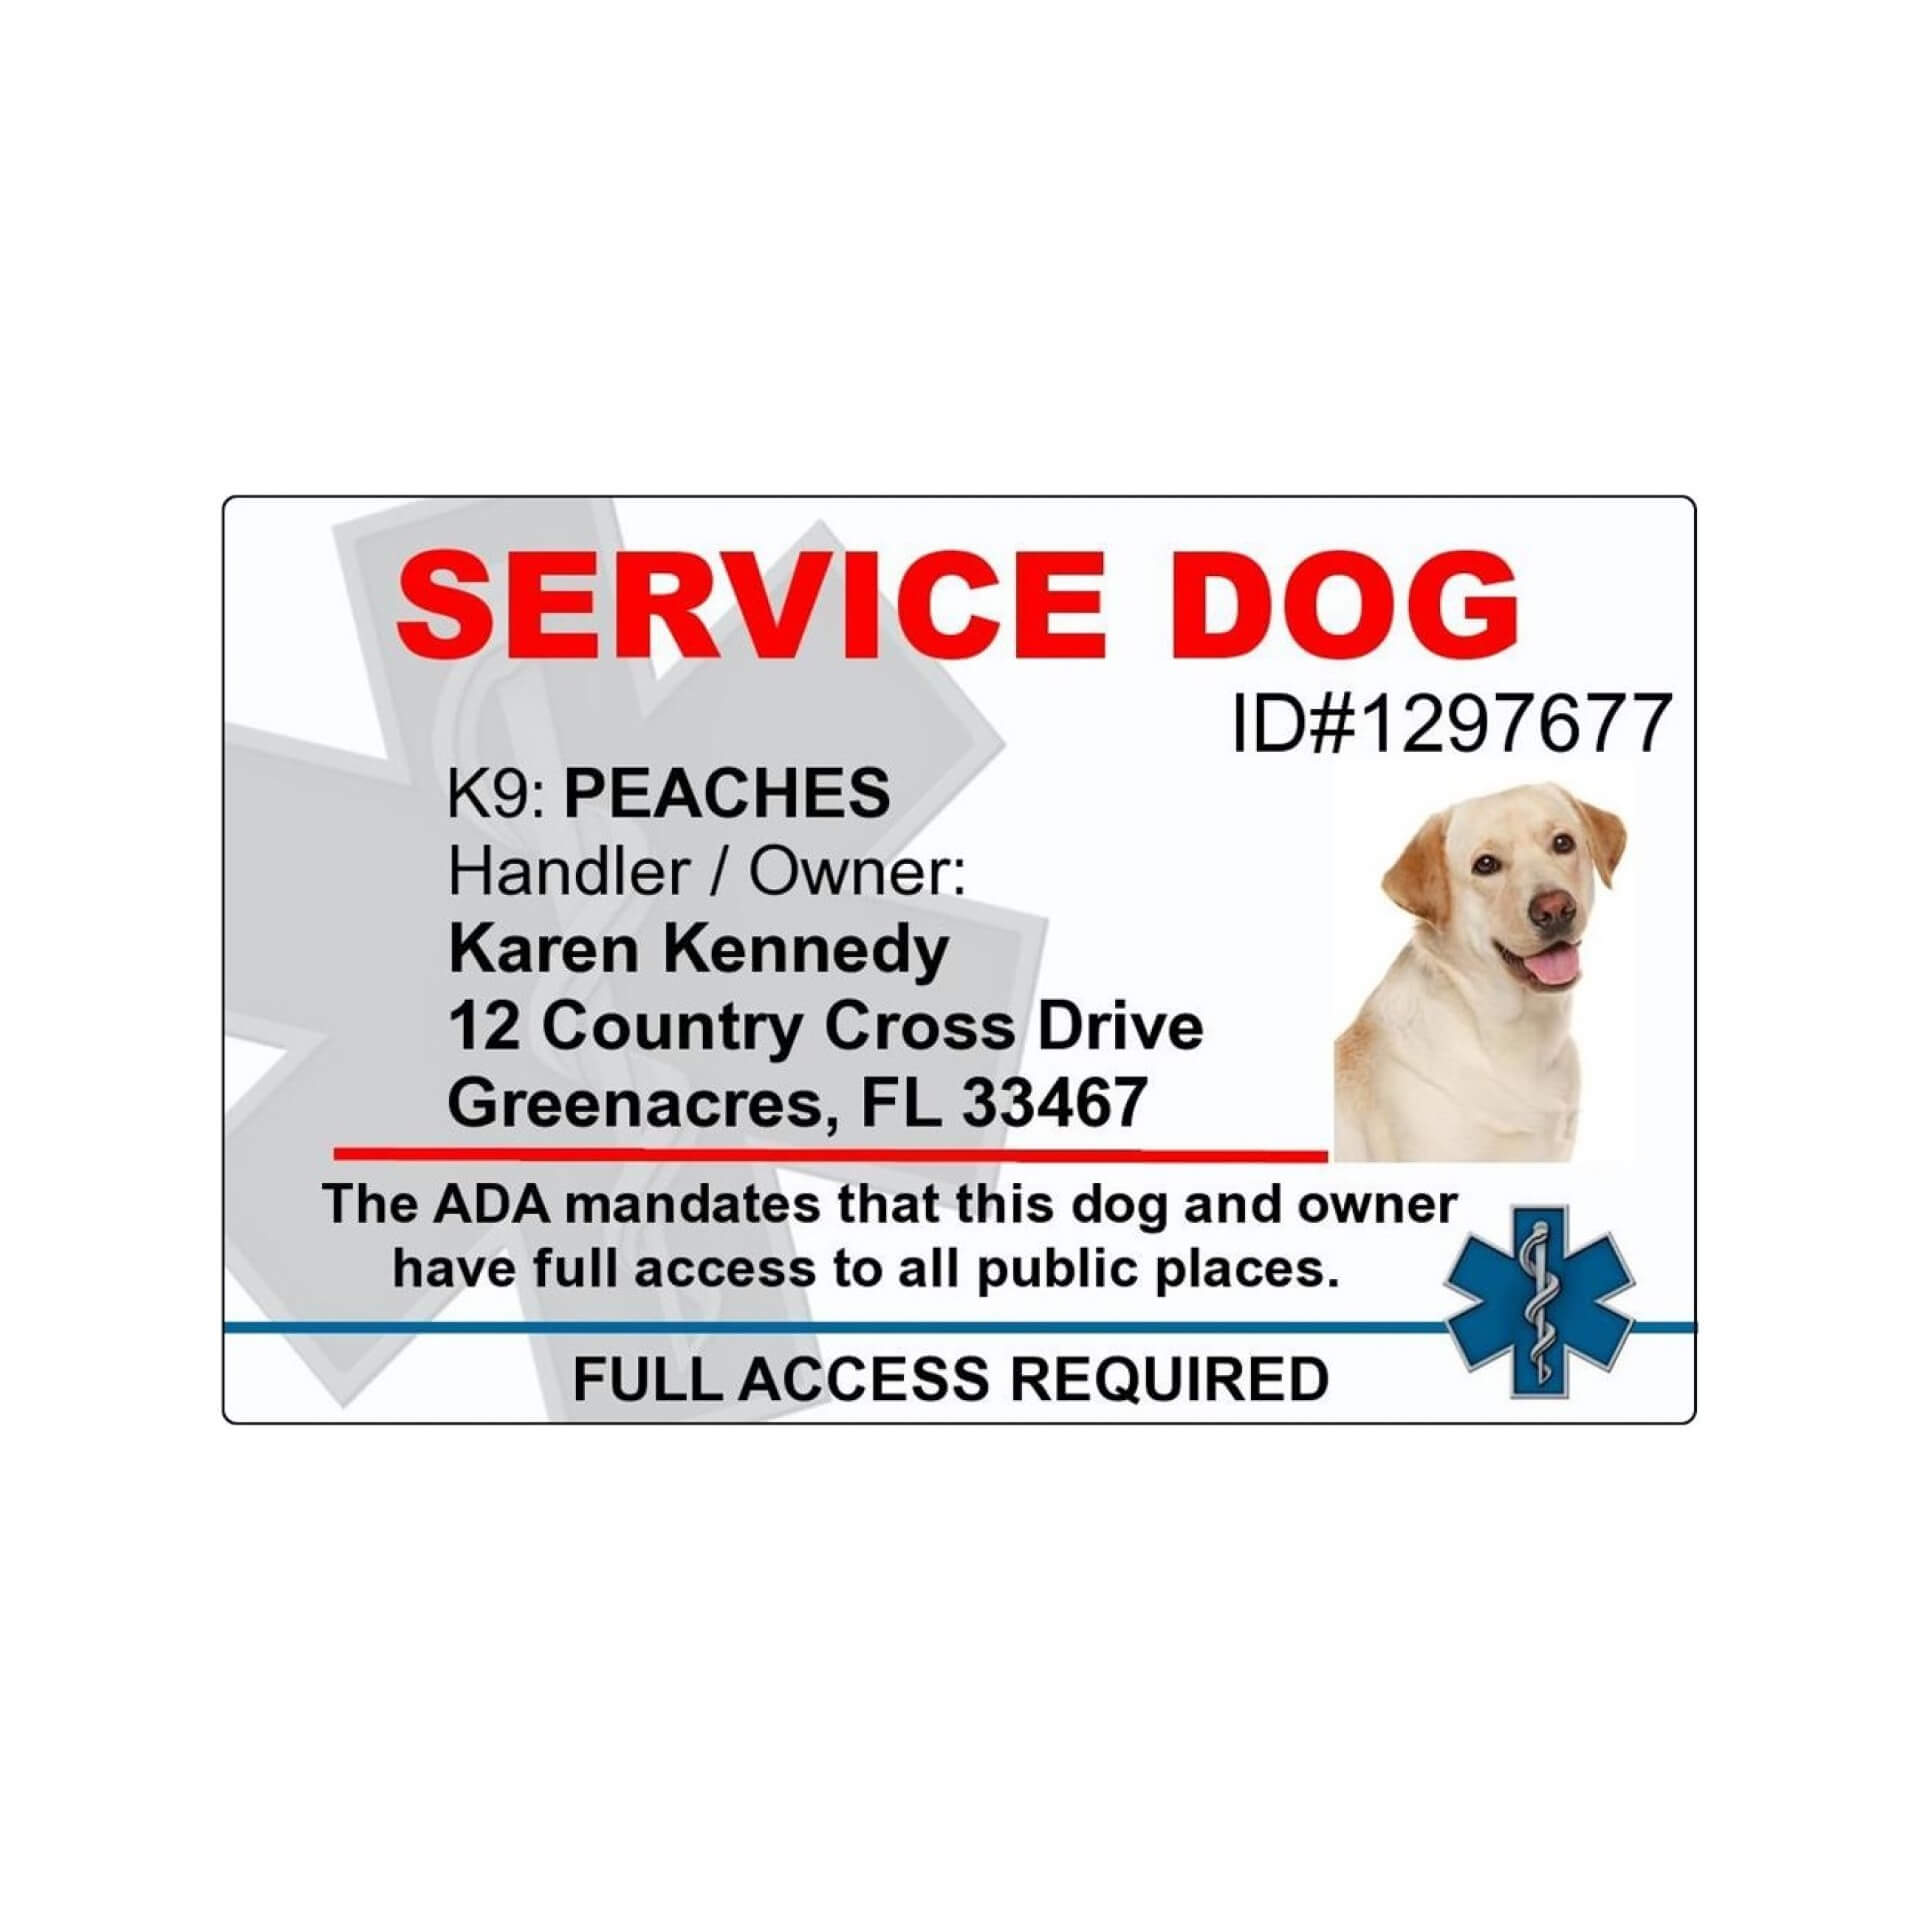 018 Template Ideas Service Dog Certificate Singular Id Free Intended For Service Dog Certificate Template